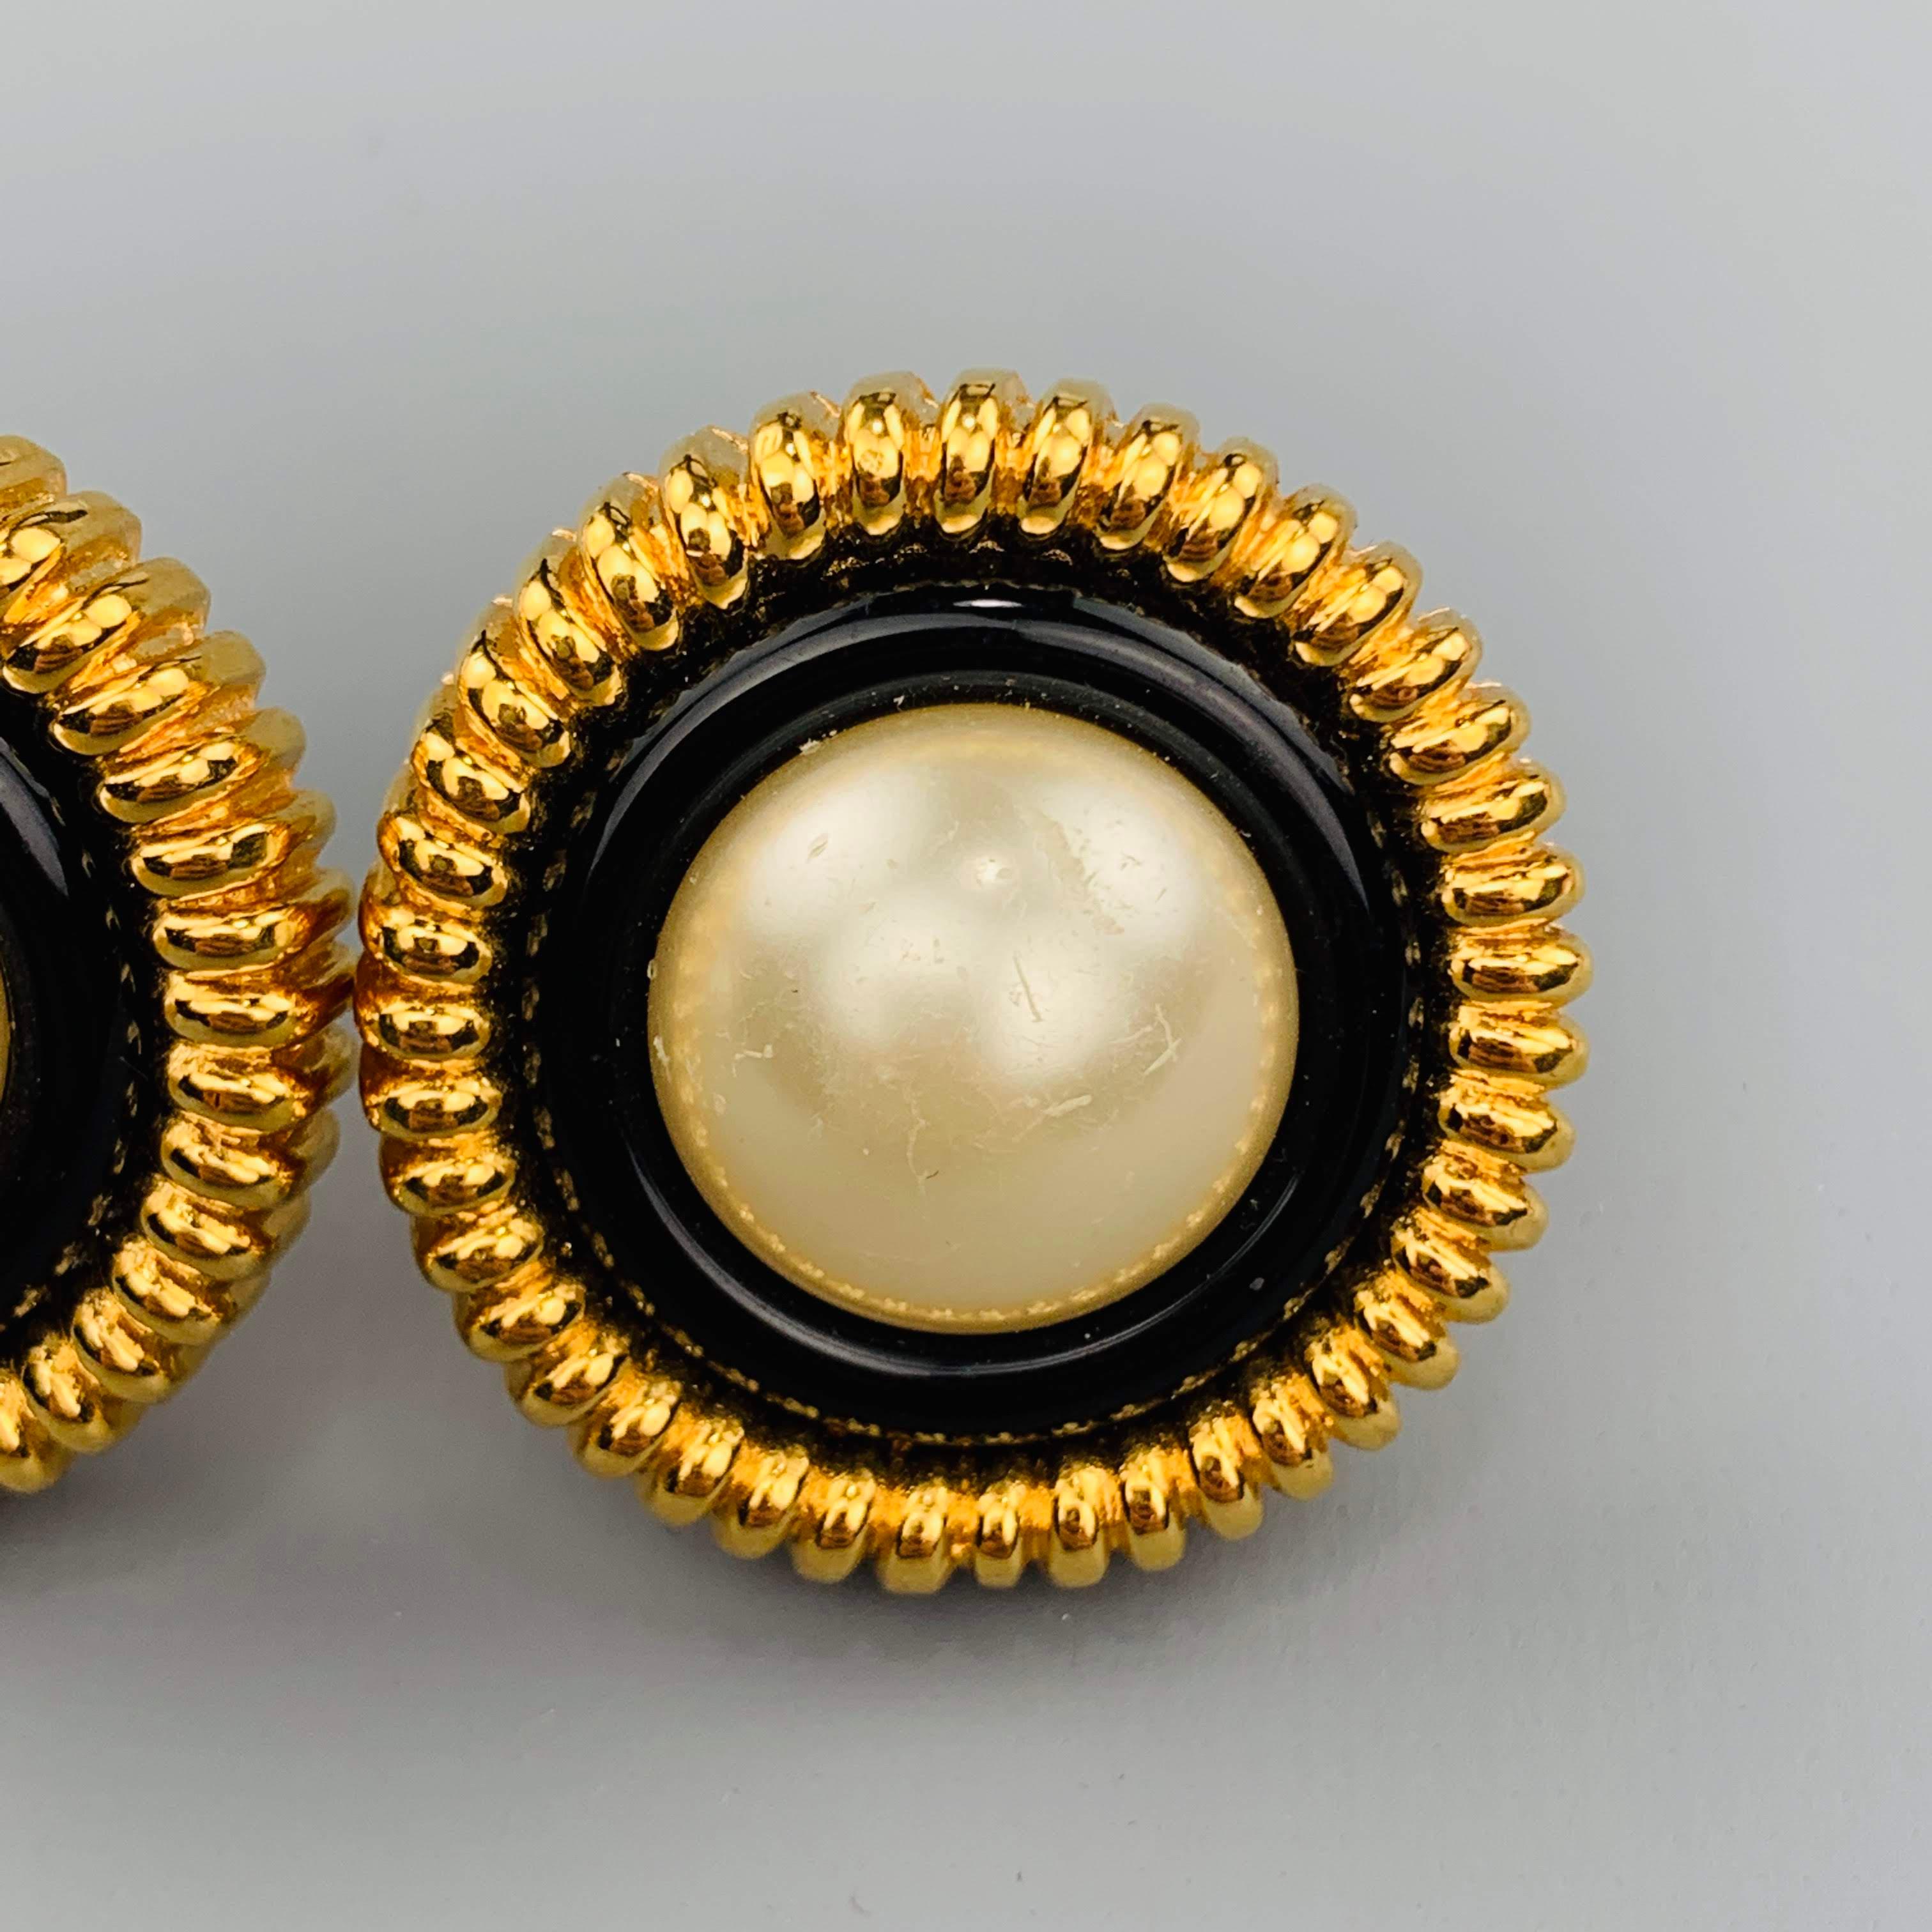 Vintage CHANEL Season 23 circa 1986 clip on earrings feature a yellow gold tone textured circle with a faux pearl center encased with a black border. Made in France.
 
Very Good Pre-Owned Condition.
Marked: 23
 
3.5 x 3.5 cm.